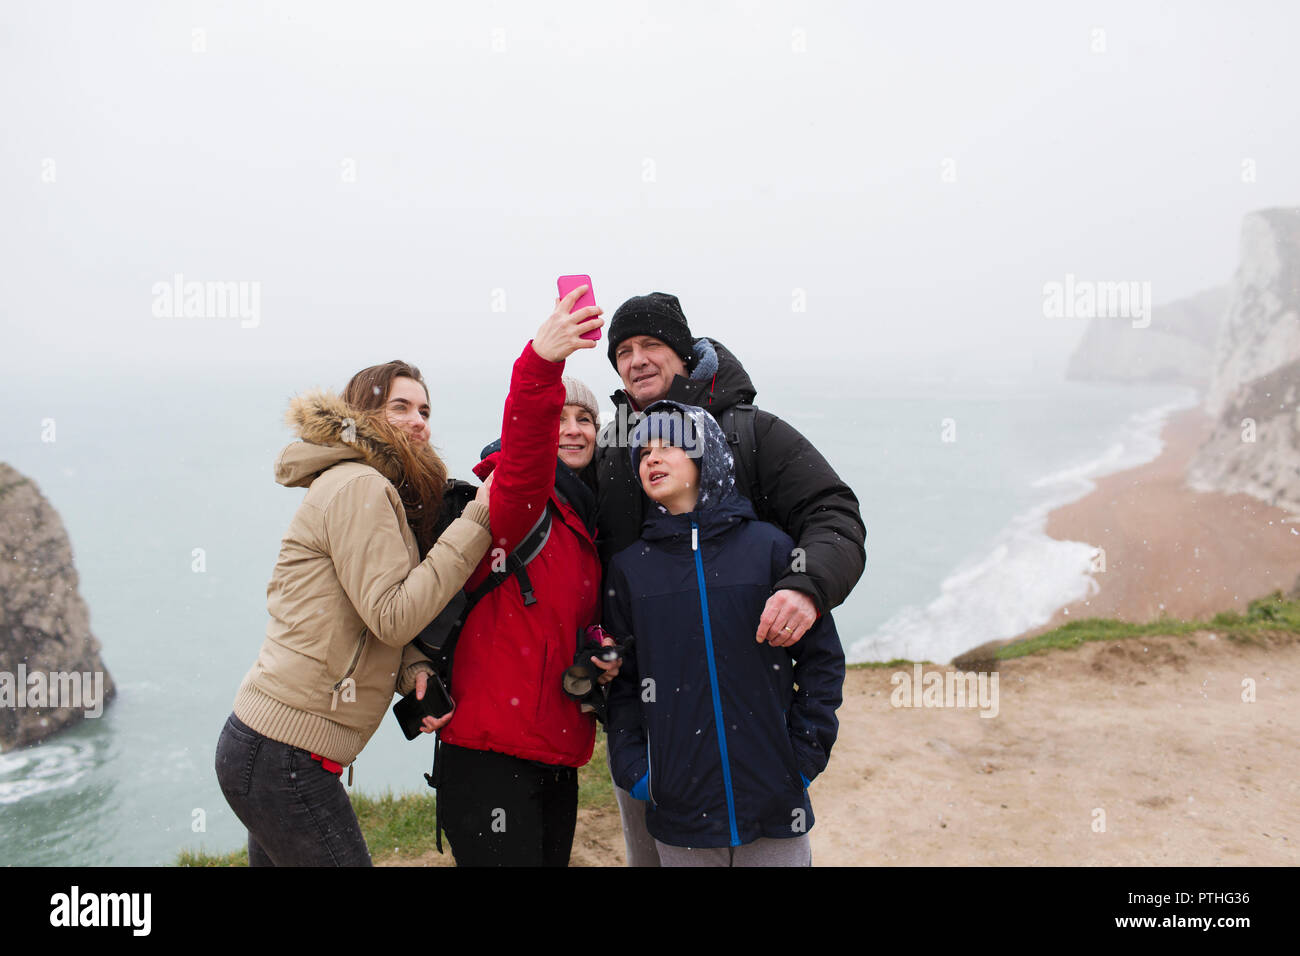 Family with camera phone taking selfie on cliff overlooking ocean Stock Photo